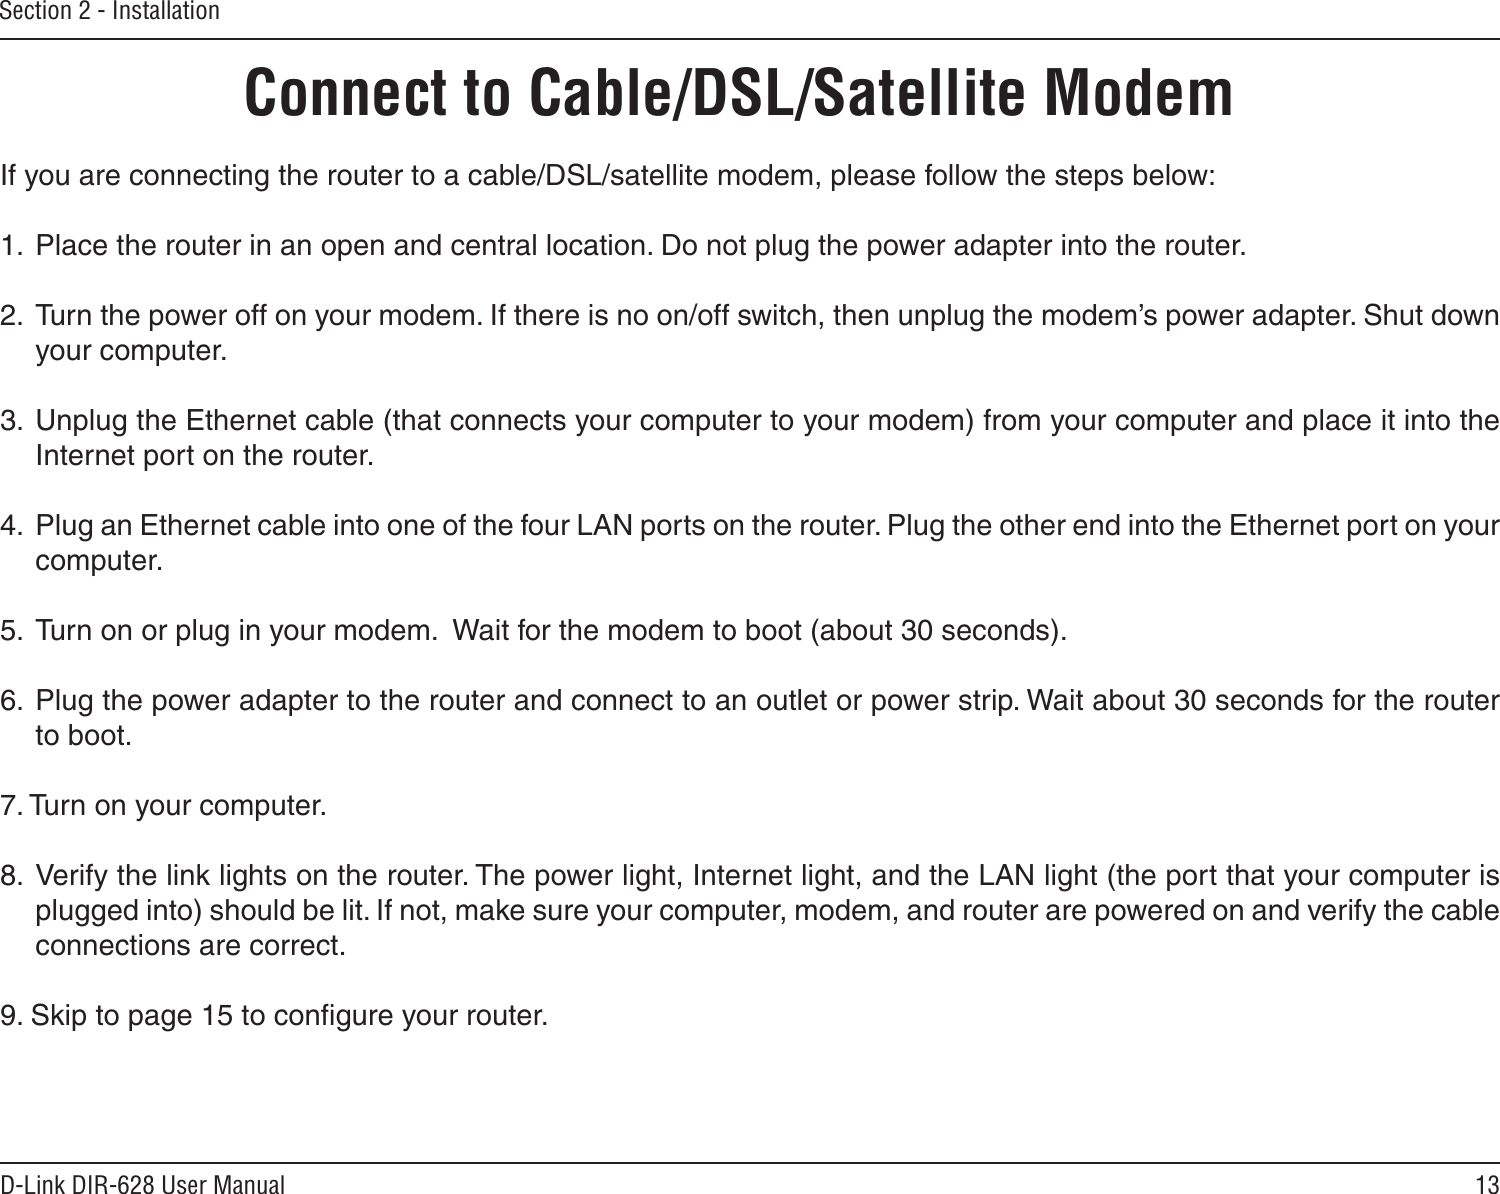 13D-Link DIR-628 User ManualSection 2 - InstallationIf you are connecting the router to a cable/DSL/satellite modem, please follow the steps below:1.  Place the router in an open and central location. Do not plug the power adapter into the router. 2.  Turn the power off on your modem. If there is no on/off switch, then unplug the modem’s power adapter. Shut down your computer.3.  Unplug the Ethernet cable (that connects your computer to your modem) from your computer and place it into the Internet port on the router.  4.  Plug an Ethernet cable into one of the four LAN ports on the router. Plug the other end into the Ethernet port on your computer.5.  Turn on or plug in your modem.  Wait for the modem to boot (about 30 seconds). 6.  Plug the power adapter to the router and connect to an outlet or power strip. Wait about 30 seconds for the router to boot. 7. Turn on your computer. 8.  Verify the link lights on the router. The power light, Internet light, and the LAN light (the port that your computer is plugged into) should be lit. If not, make sure your computer, modem, and router are powered on and verify the cable connections are correct. 9. Skip to page 15 to conﬁgure your router. Connect to Cable/DSL/Satellite Modem